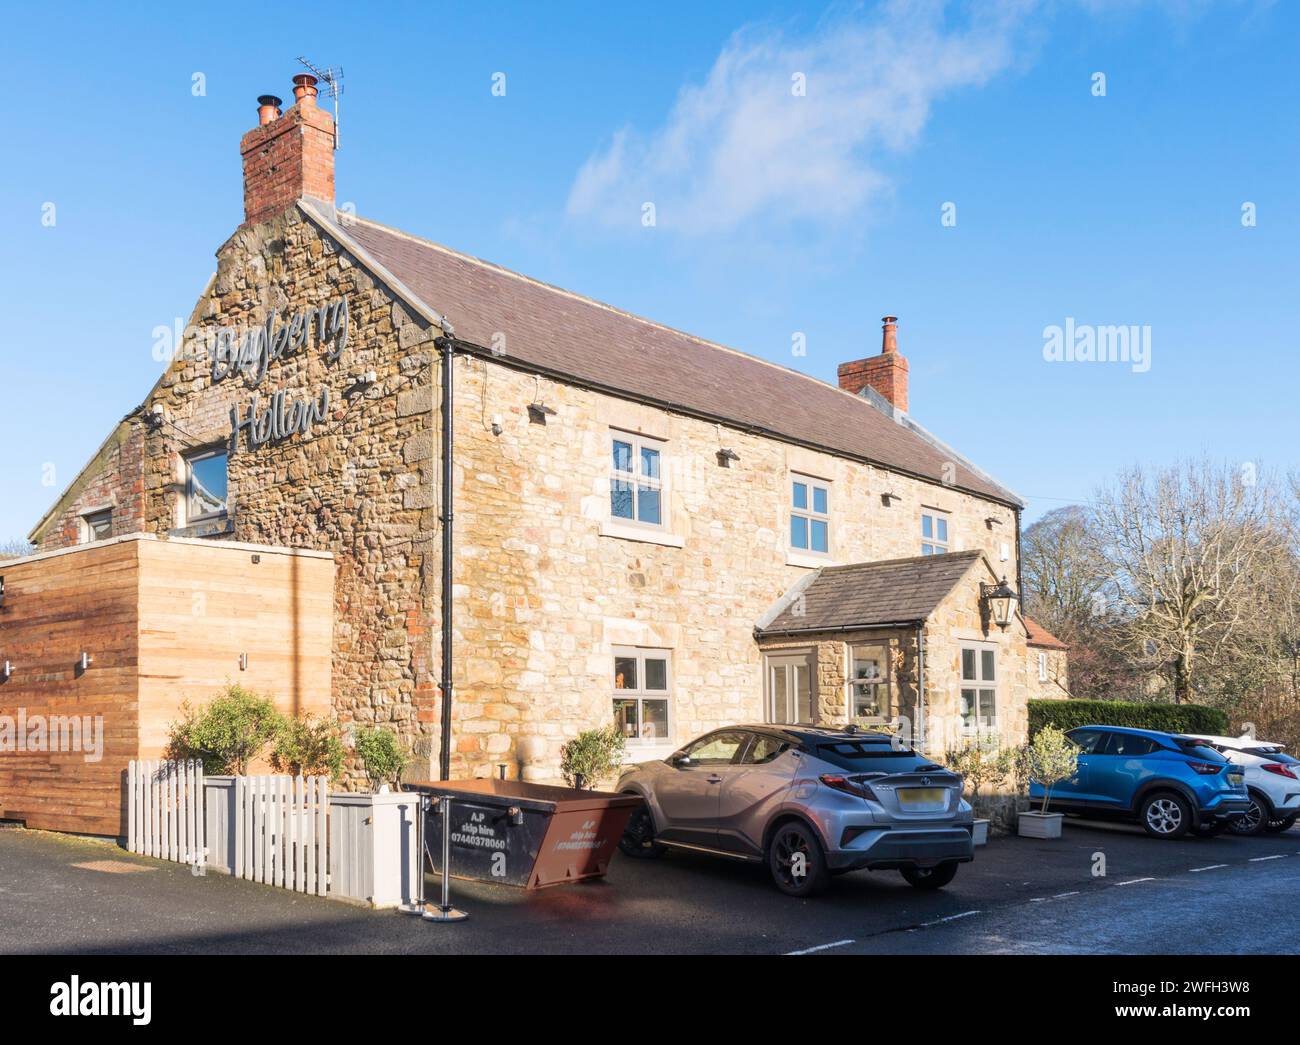 The Bayberry Hollow Cafe, ex pub Pack Horse, a Tanfield, Co. Durham, Inghilterra, Regno Unito Foto Stock